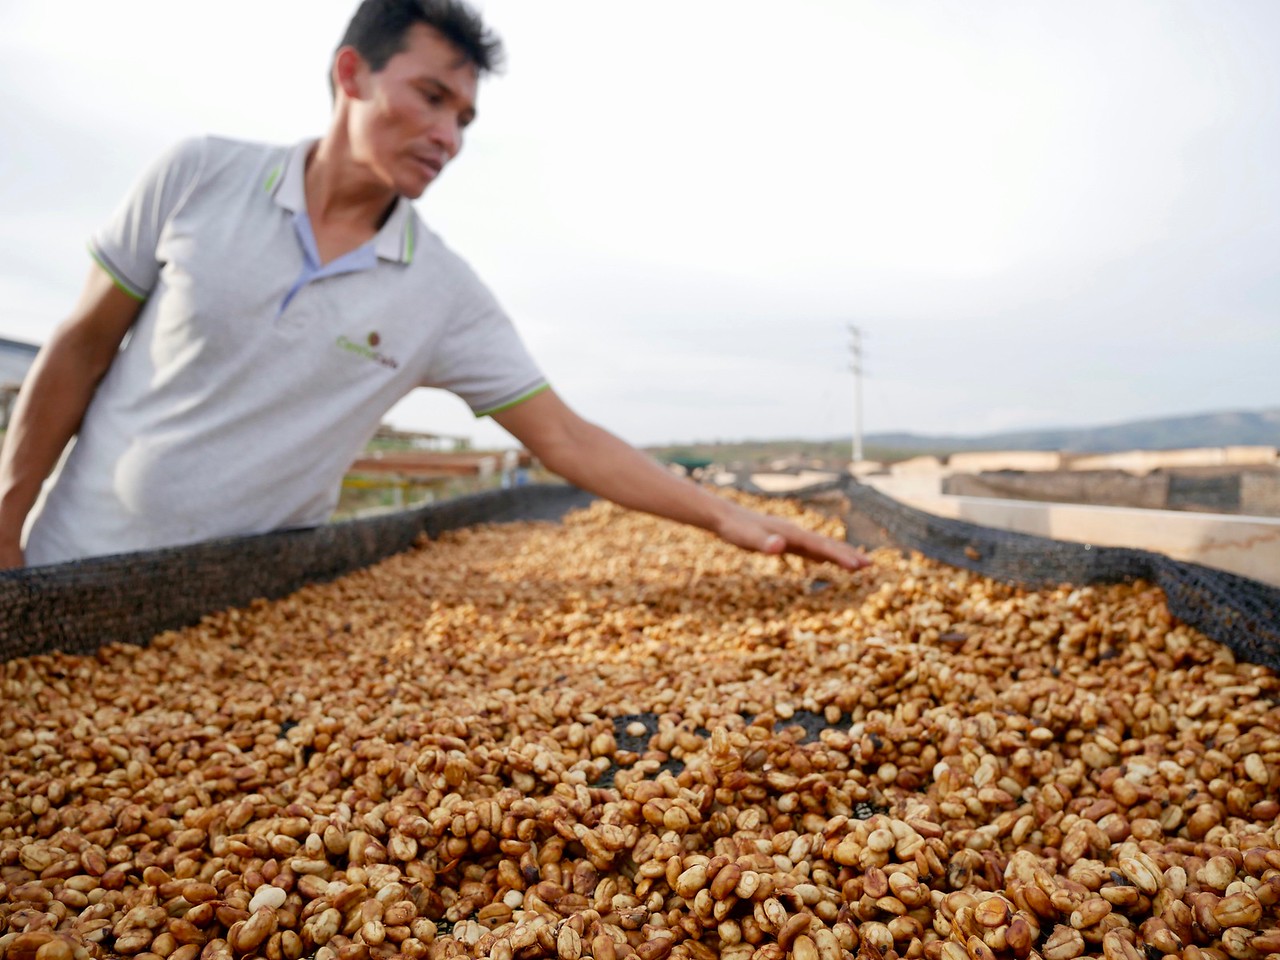 A coffee farmer from Peru standing beside coffee beans that are in the drying process.